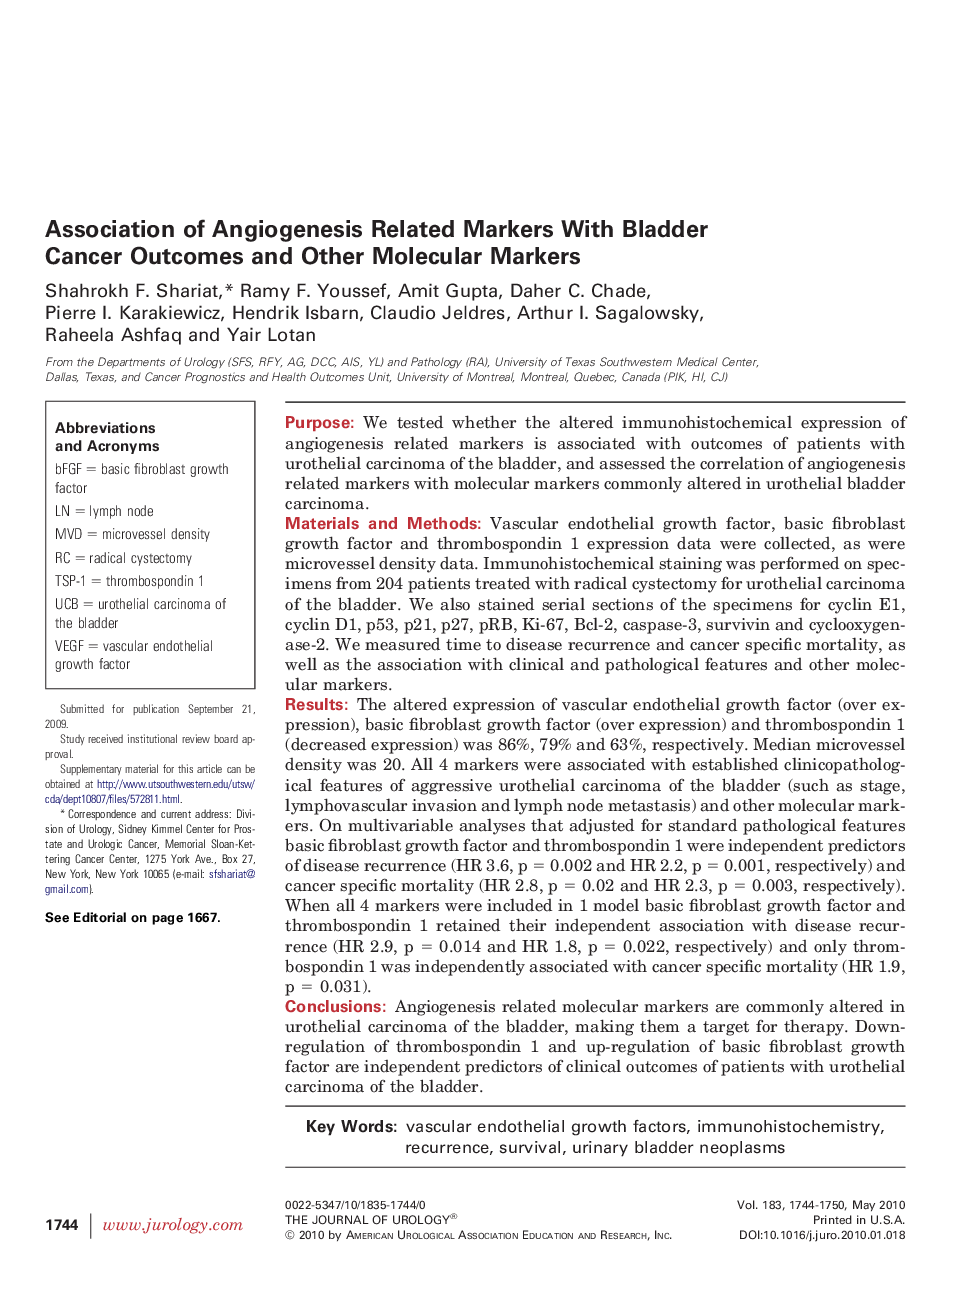 Association of Angiogenesis Related Markers With Bladder Cancer Outcomes and Other Molecular Markers